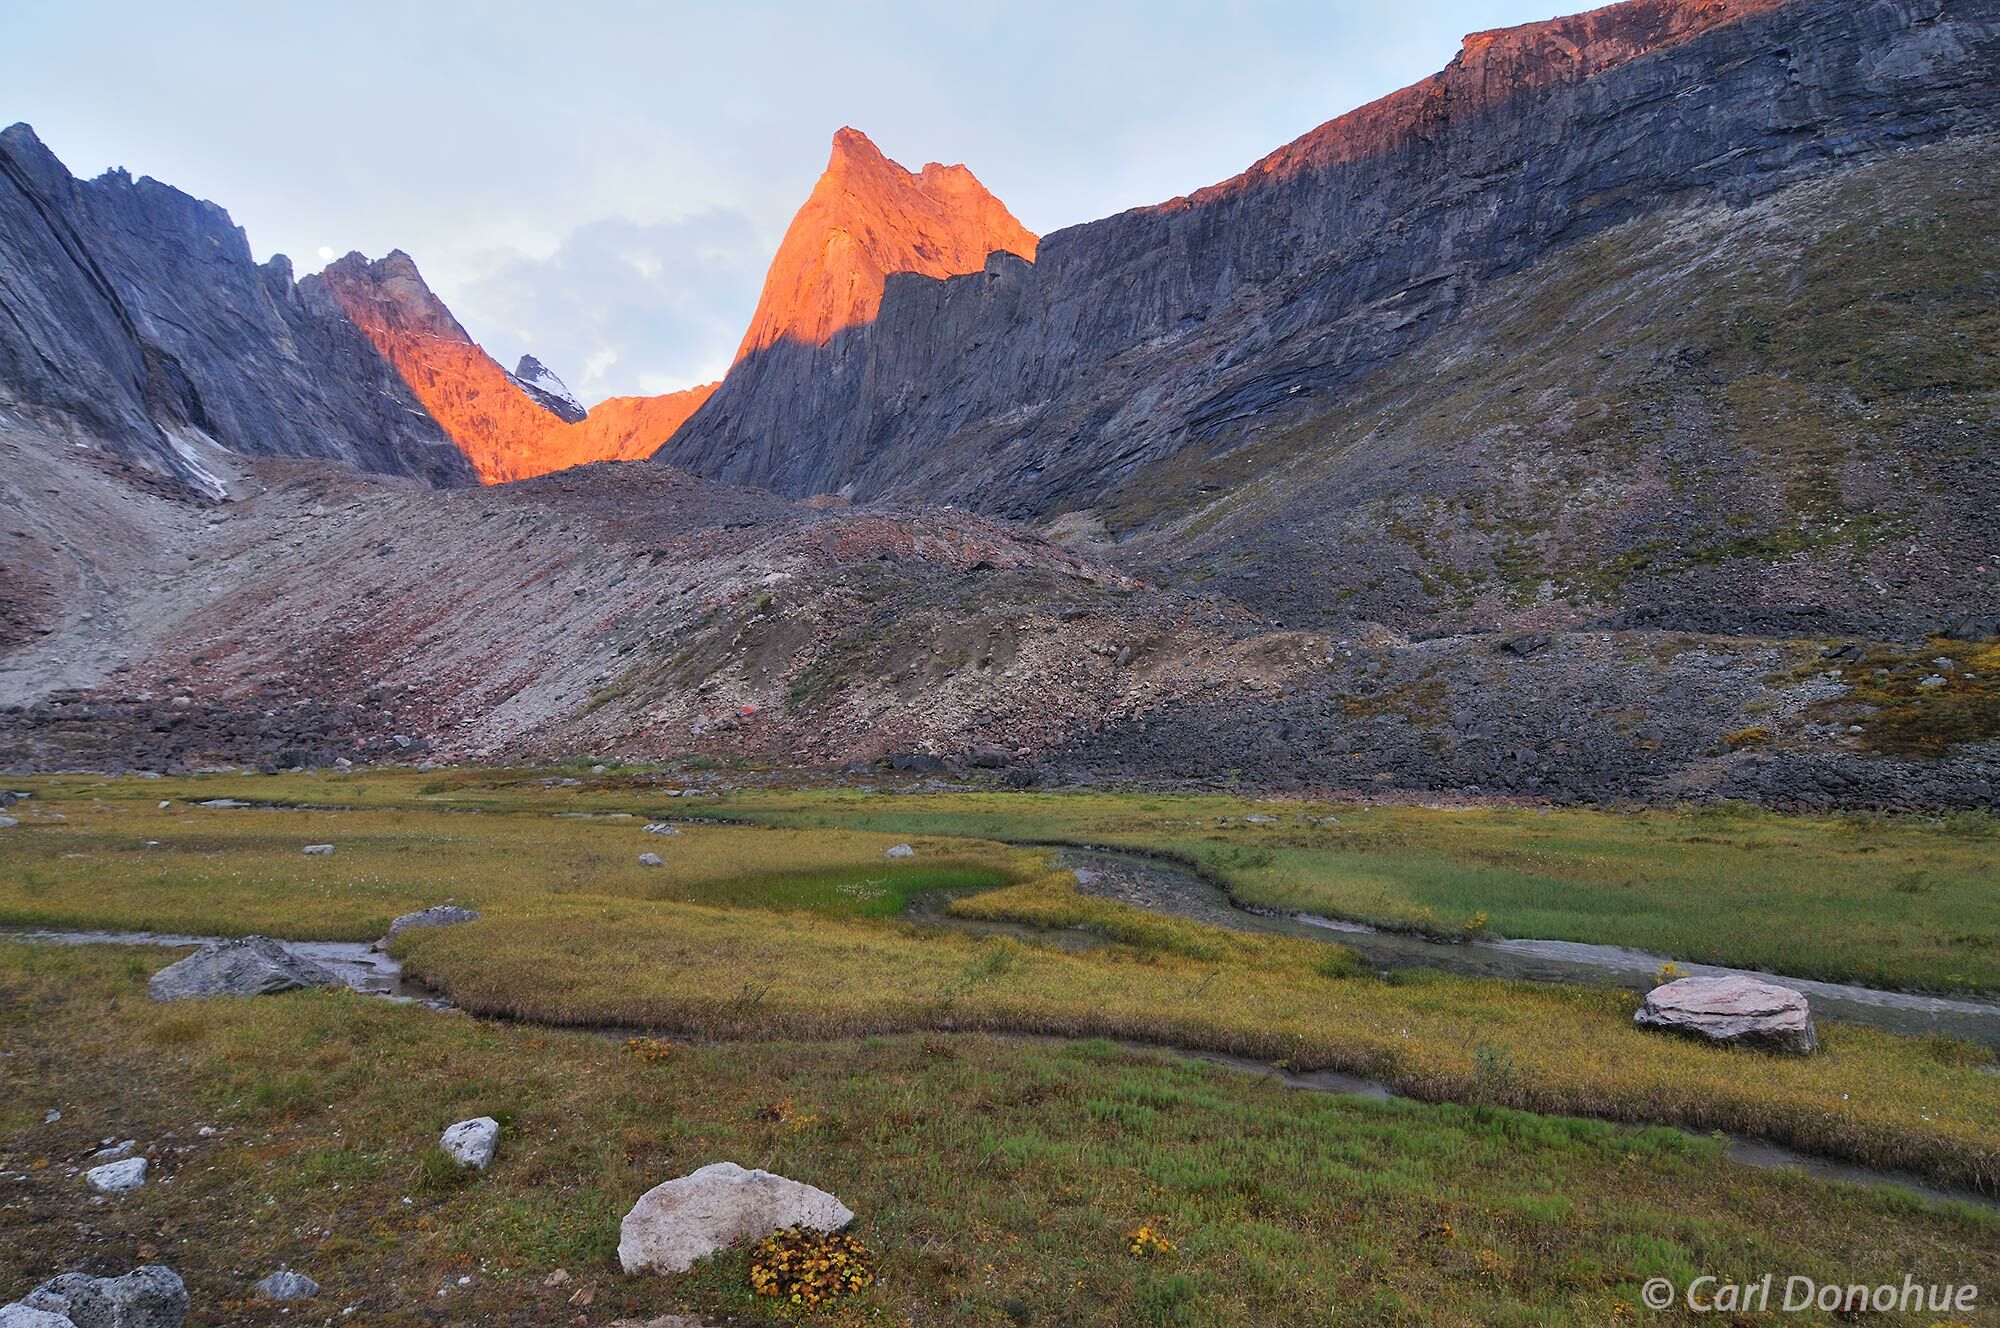 Sunrise catches the peaks of The Maidens, and Elephant’s Tooth in the background, in Alaska’s Arrigetch Peaks. The Arigetch...